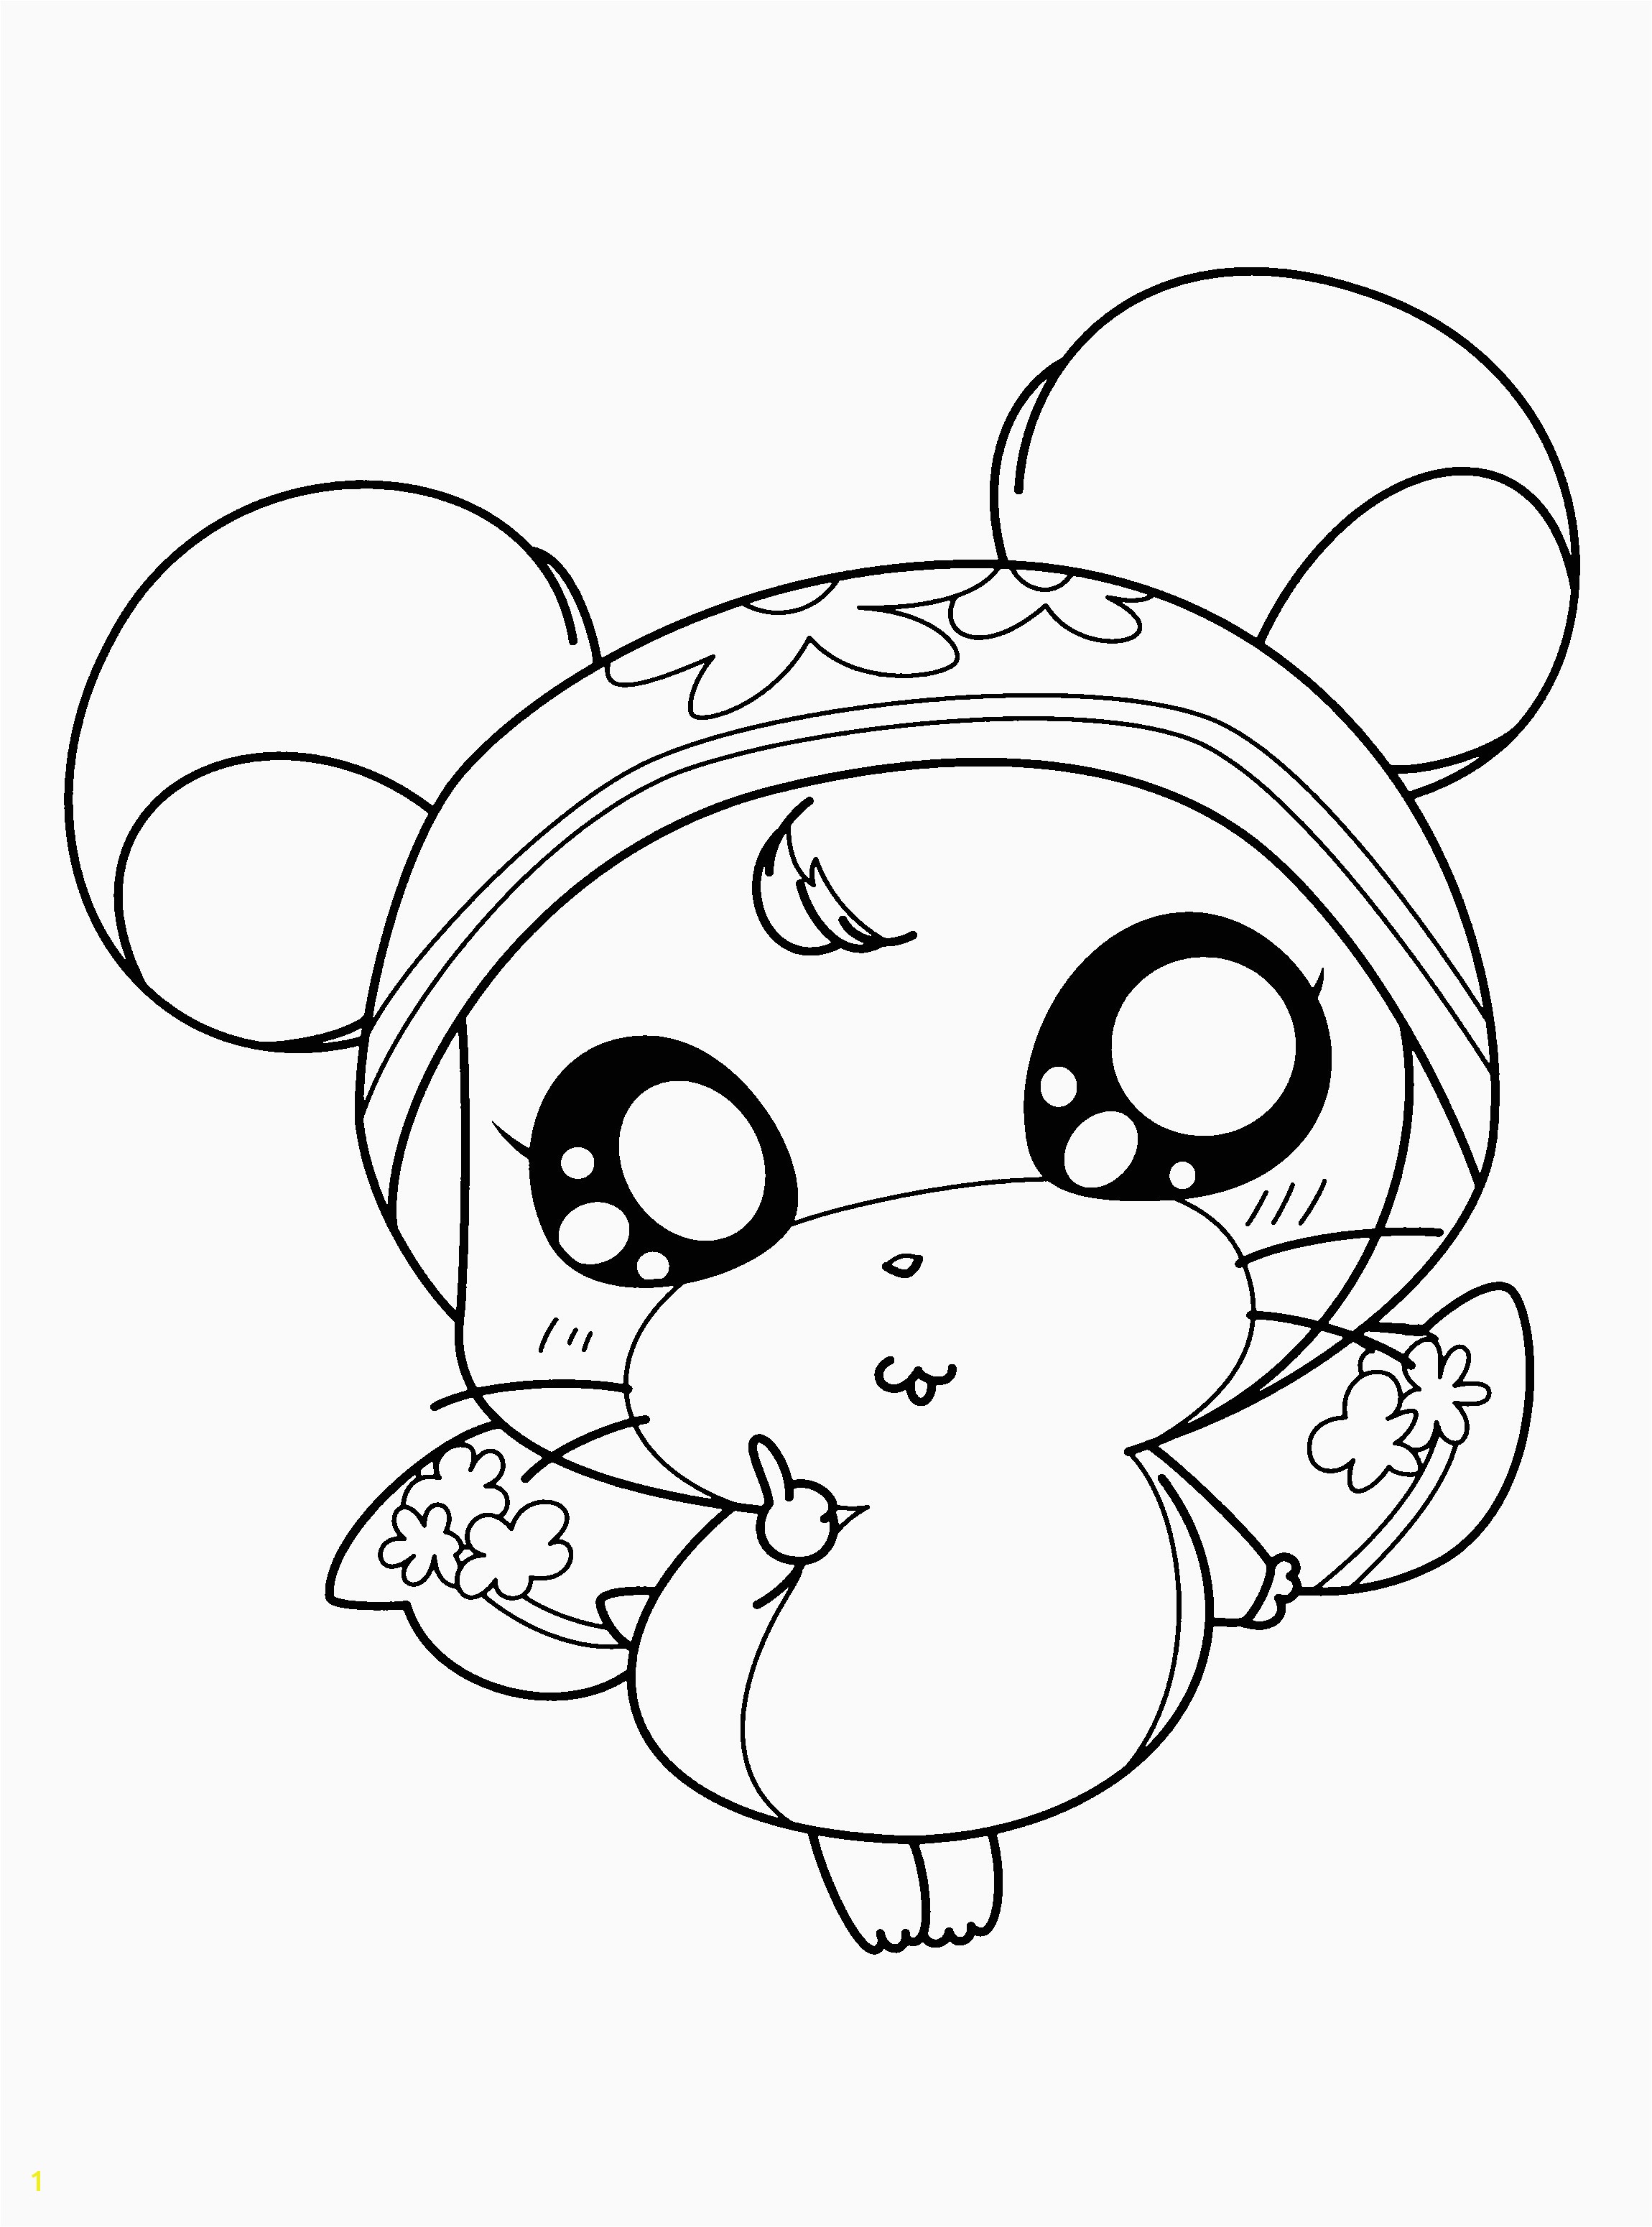 Printable Pokemon Coloring Pages Beautiful Pokemon Coloring Pages for Kids Coloring Pages